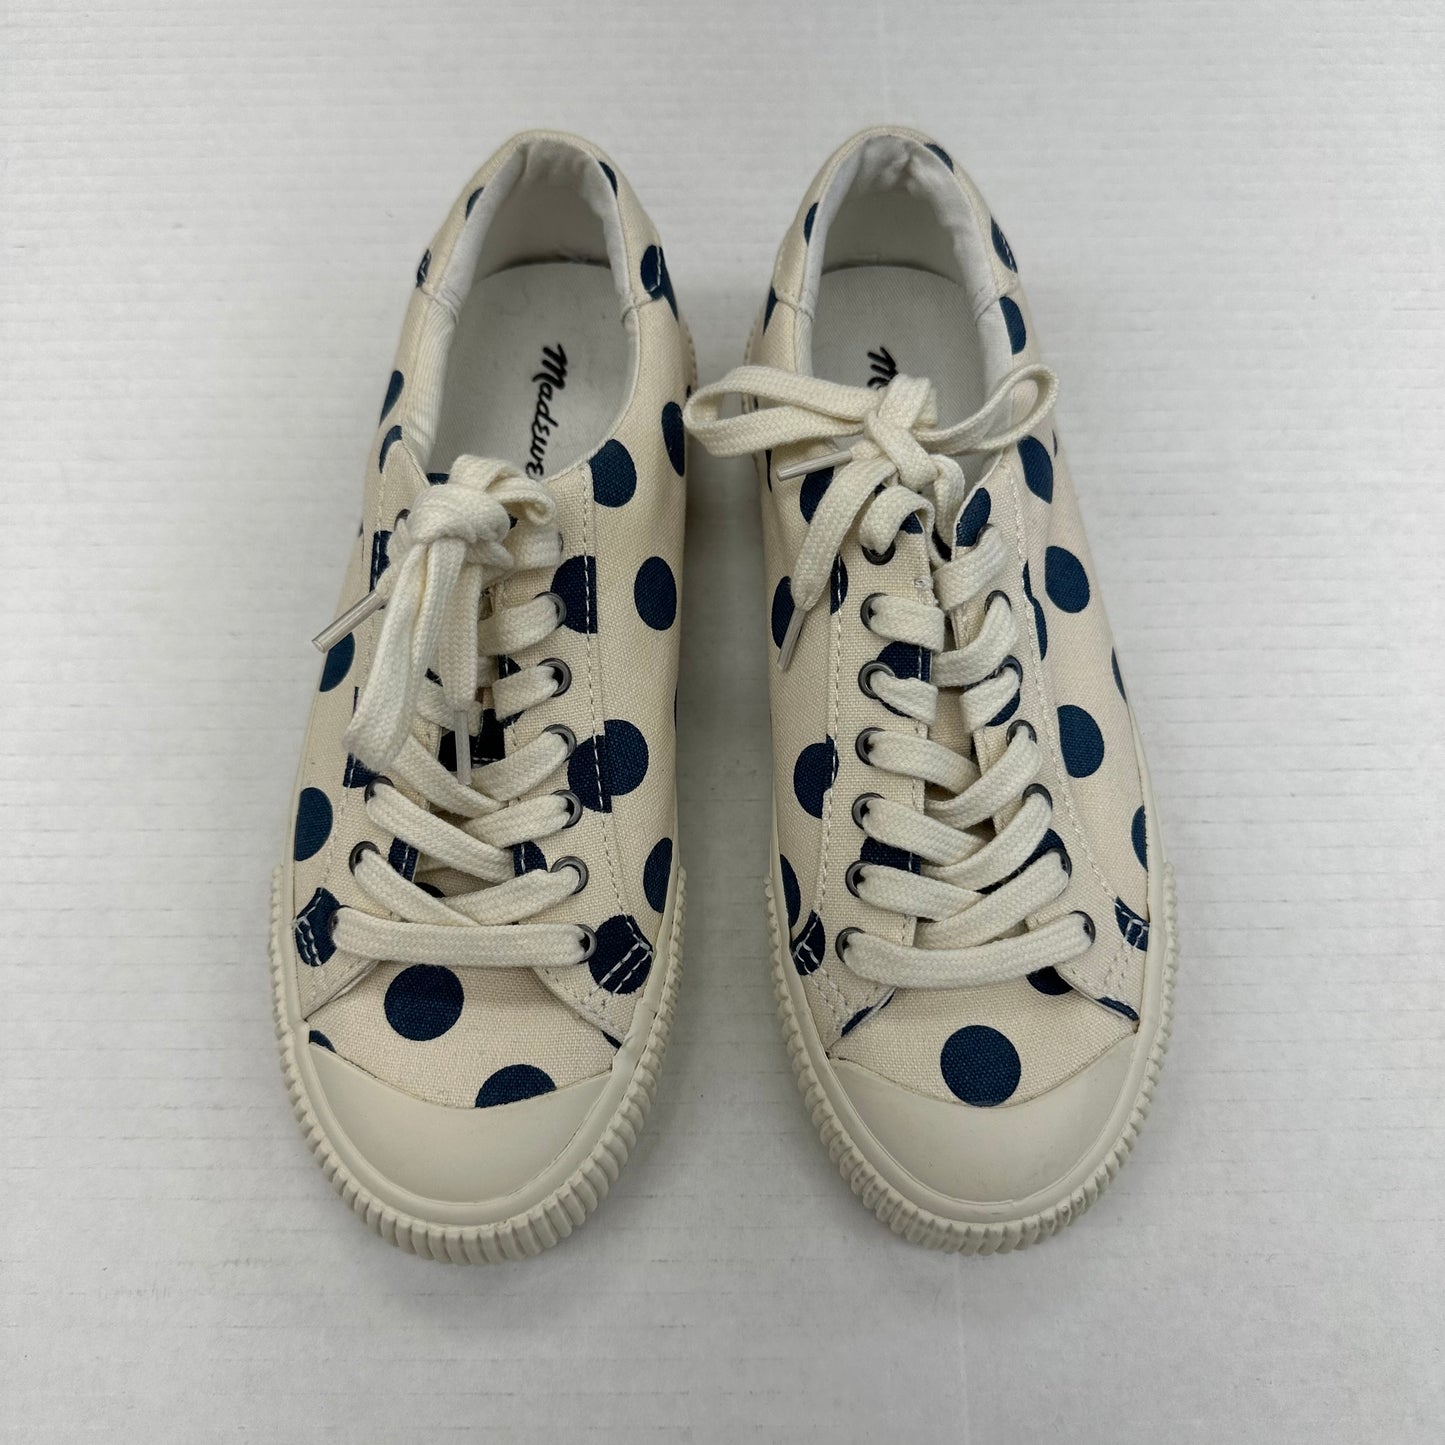 Shoes Sneakers By Madewell  Size: 5.5